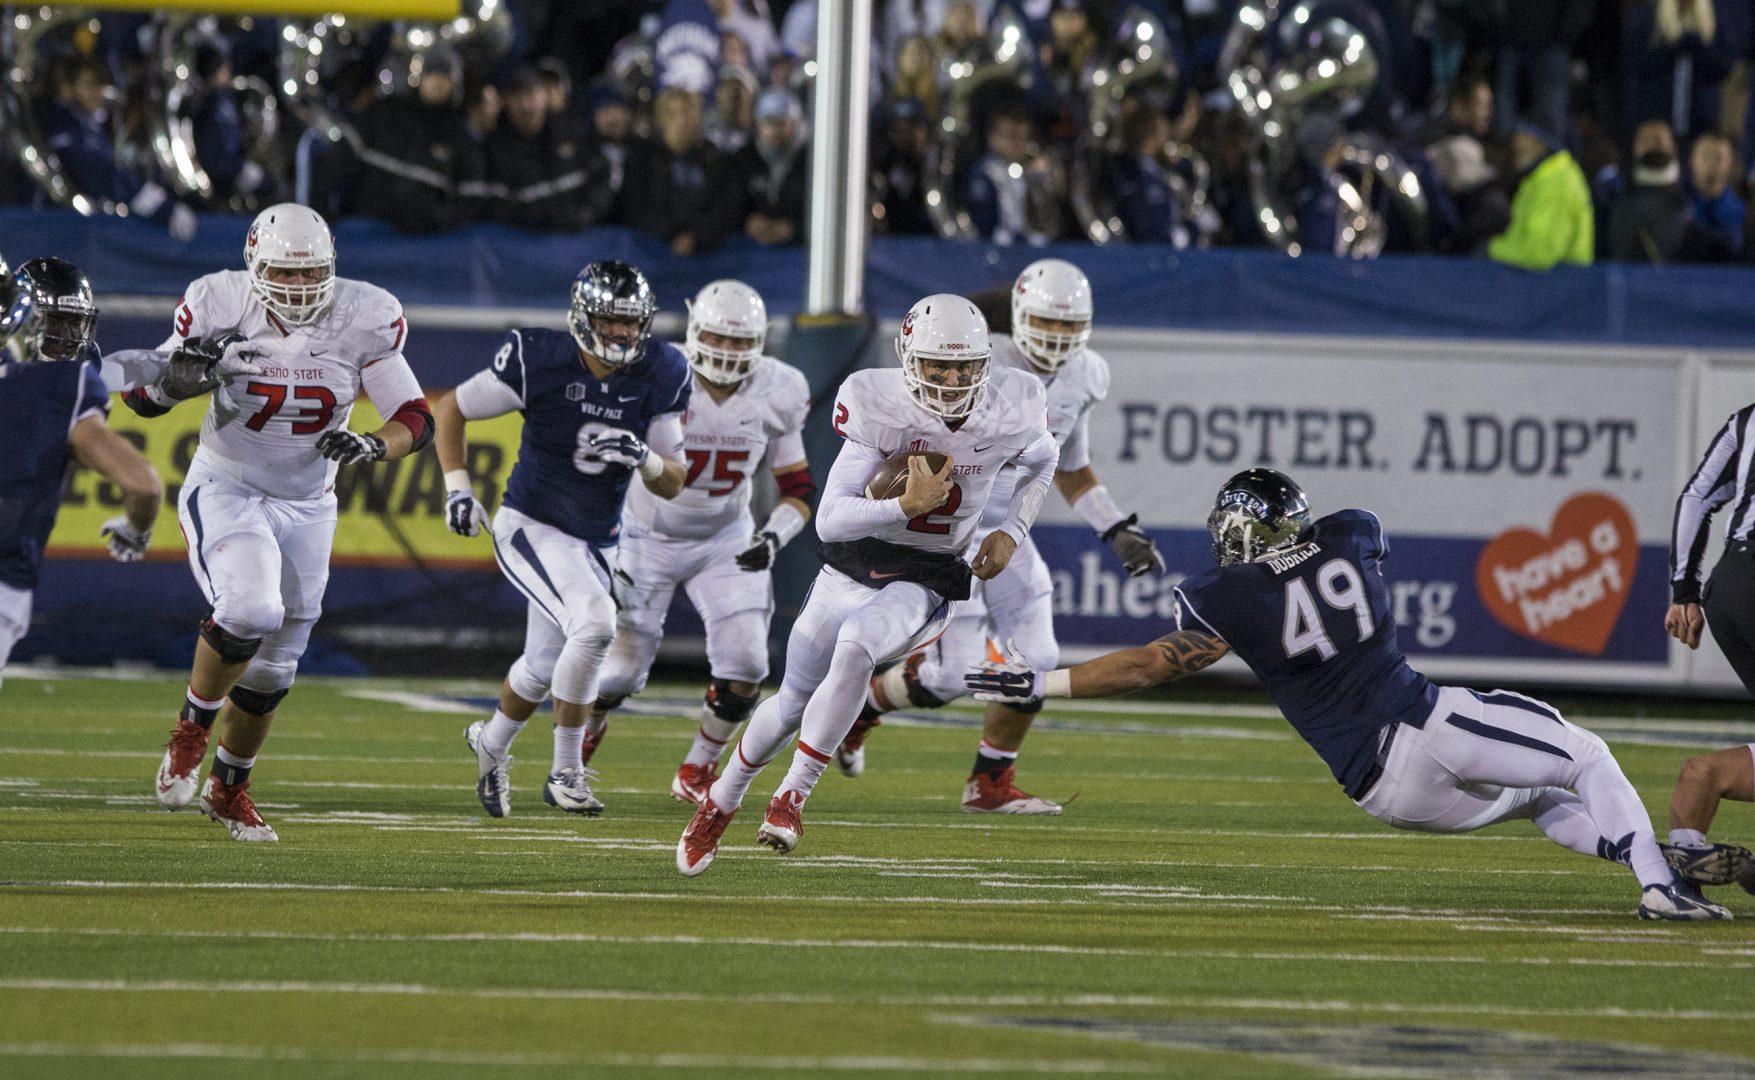 Fresno+State+quarterback+Brian+Burrell+%282%29+rushes+past+the+Nevada+Wolf+Pack+defense+during+the+Bulldogs+40-20+victory+Saturday+night+at+Mackay+Stadium+in+Reno%2C+Nevada.+Photo+by+Darlene+Wendels%2FThe+Collegian